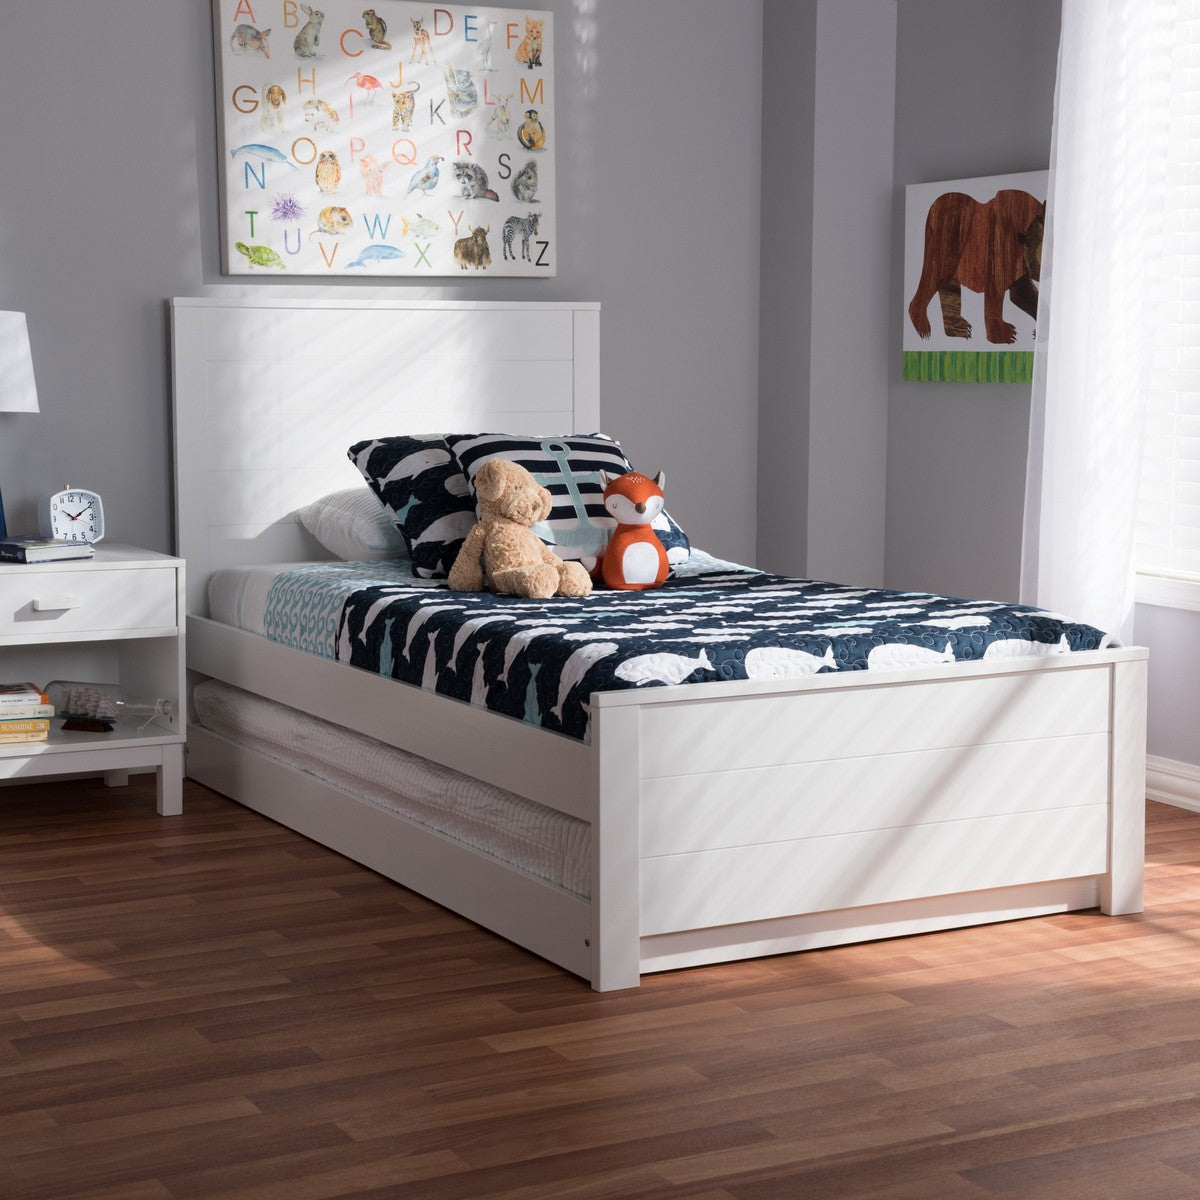 Baxton Studio Catalina Modern Classic Mission Style White-Finished Wood Twin Platform Bed with Trundle